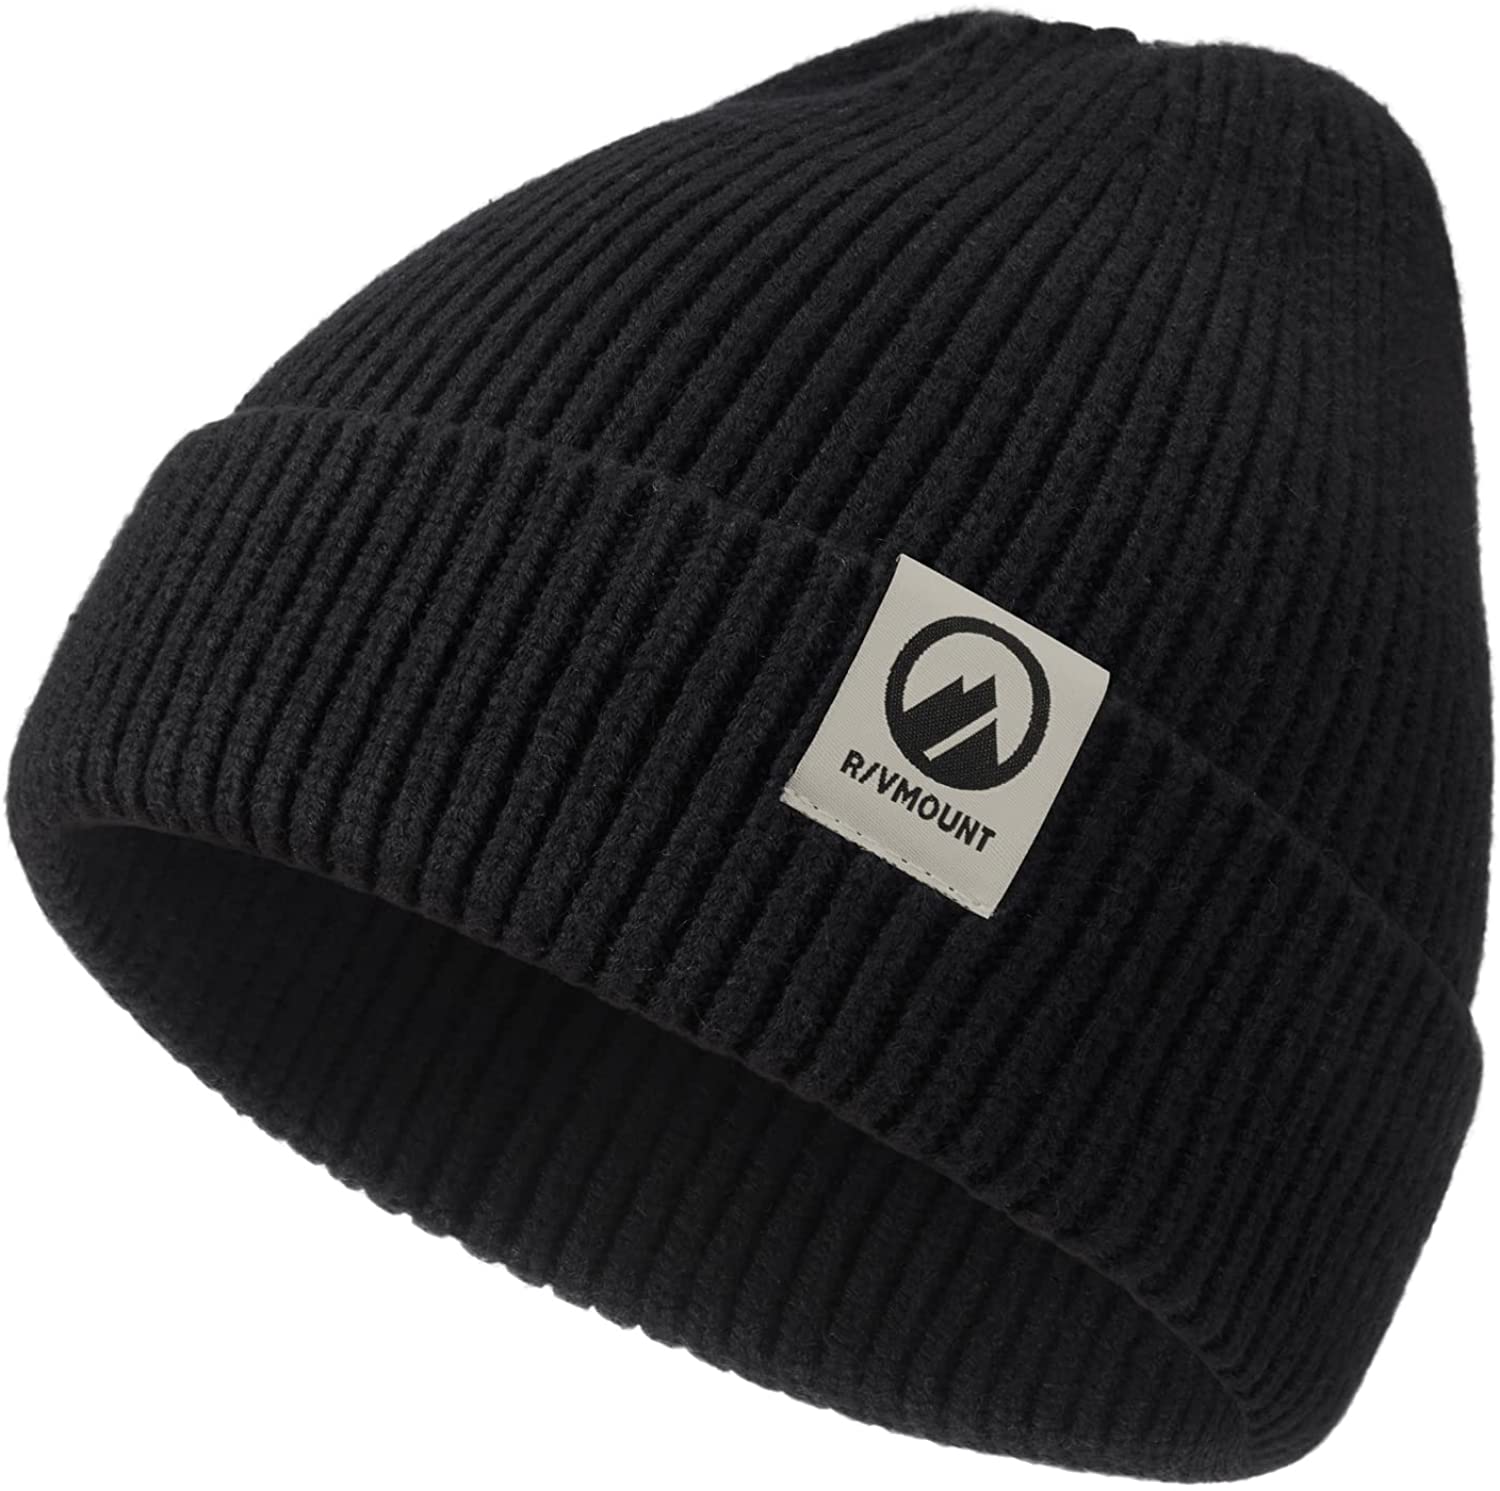 rivmount Beanie Hats for Men Women Beanies with Pom Slouchy Knit Cuffed Caps Warm Soft Stretch for Winter Cold Weather